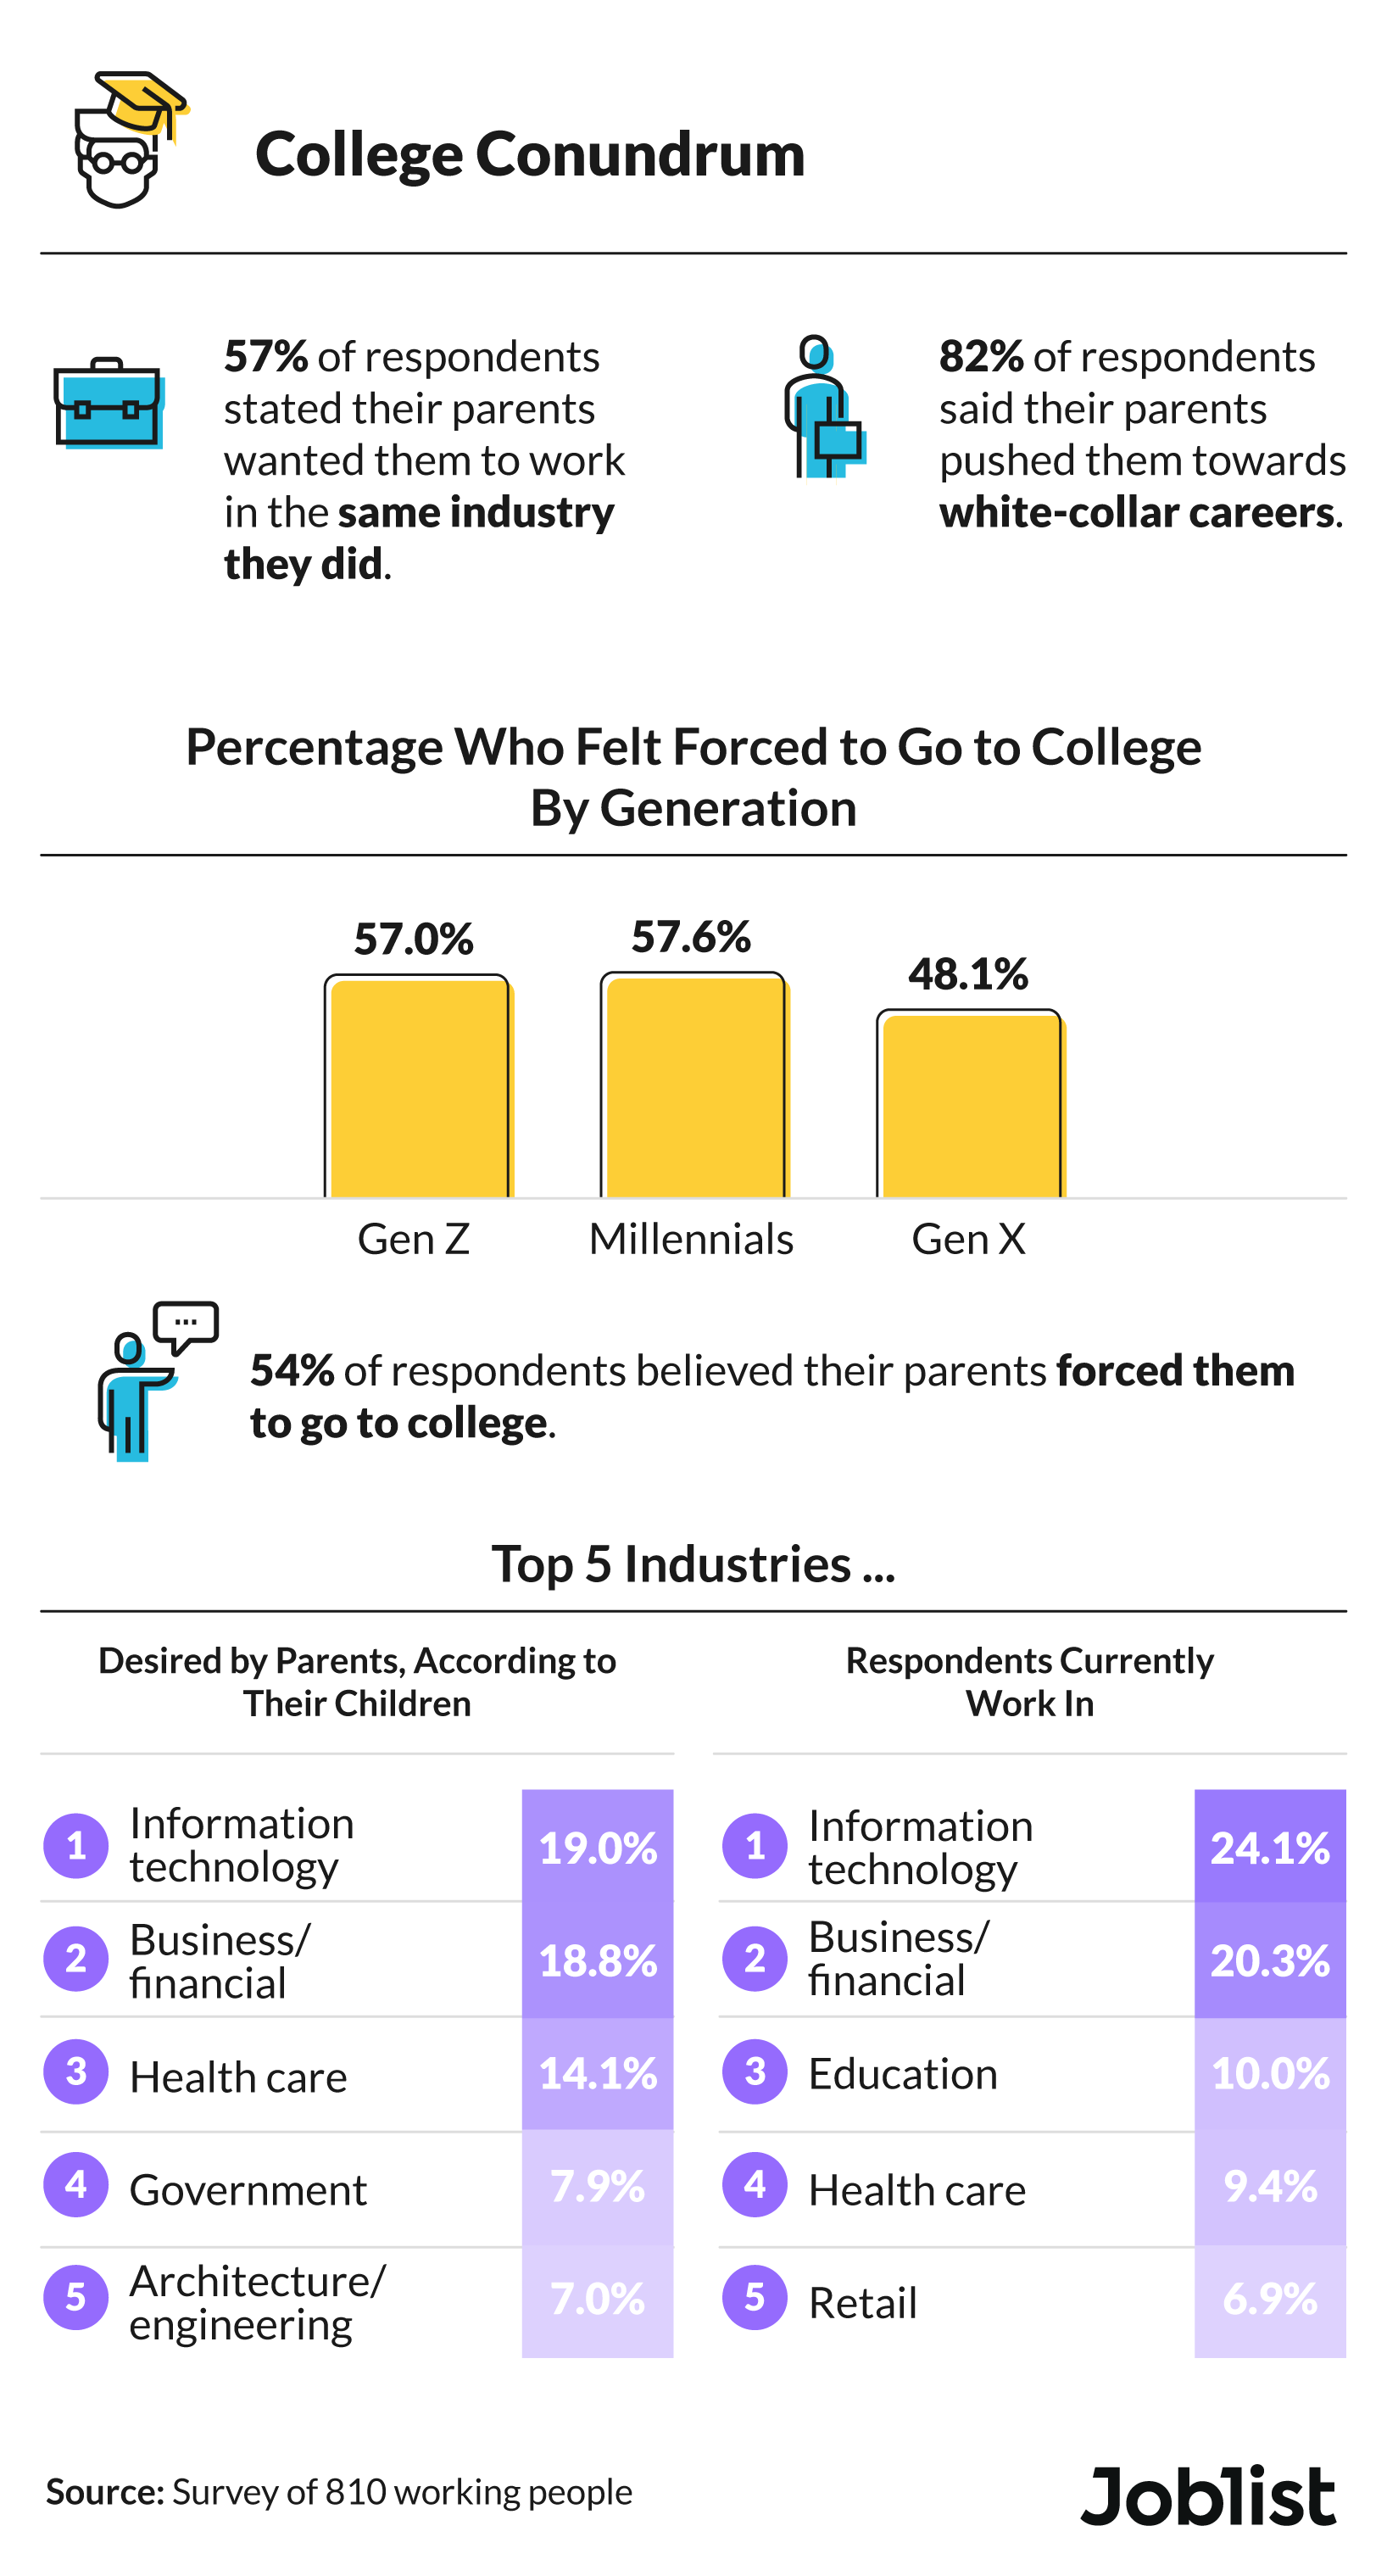 Parental influence on child's education and career industry